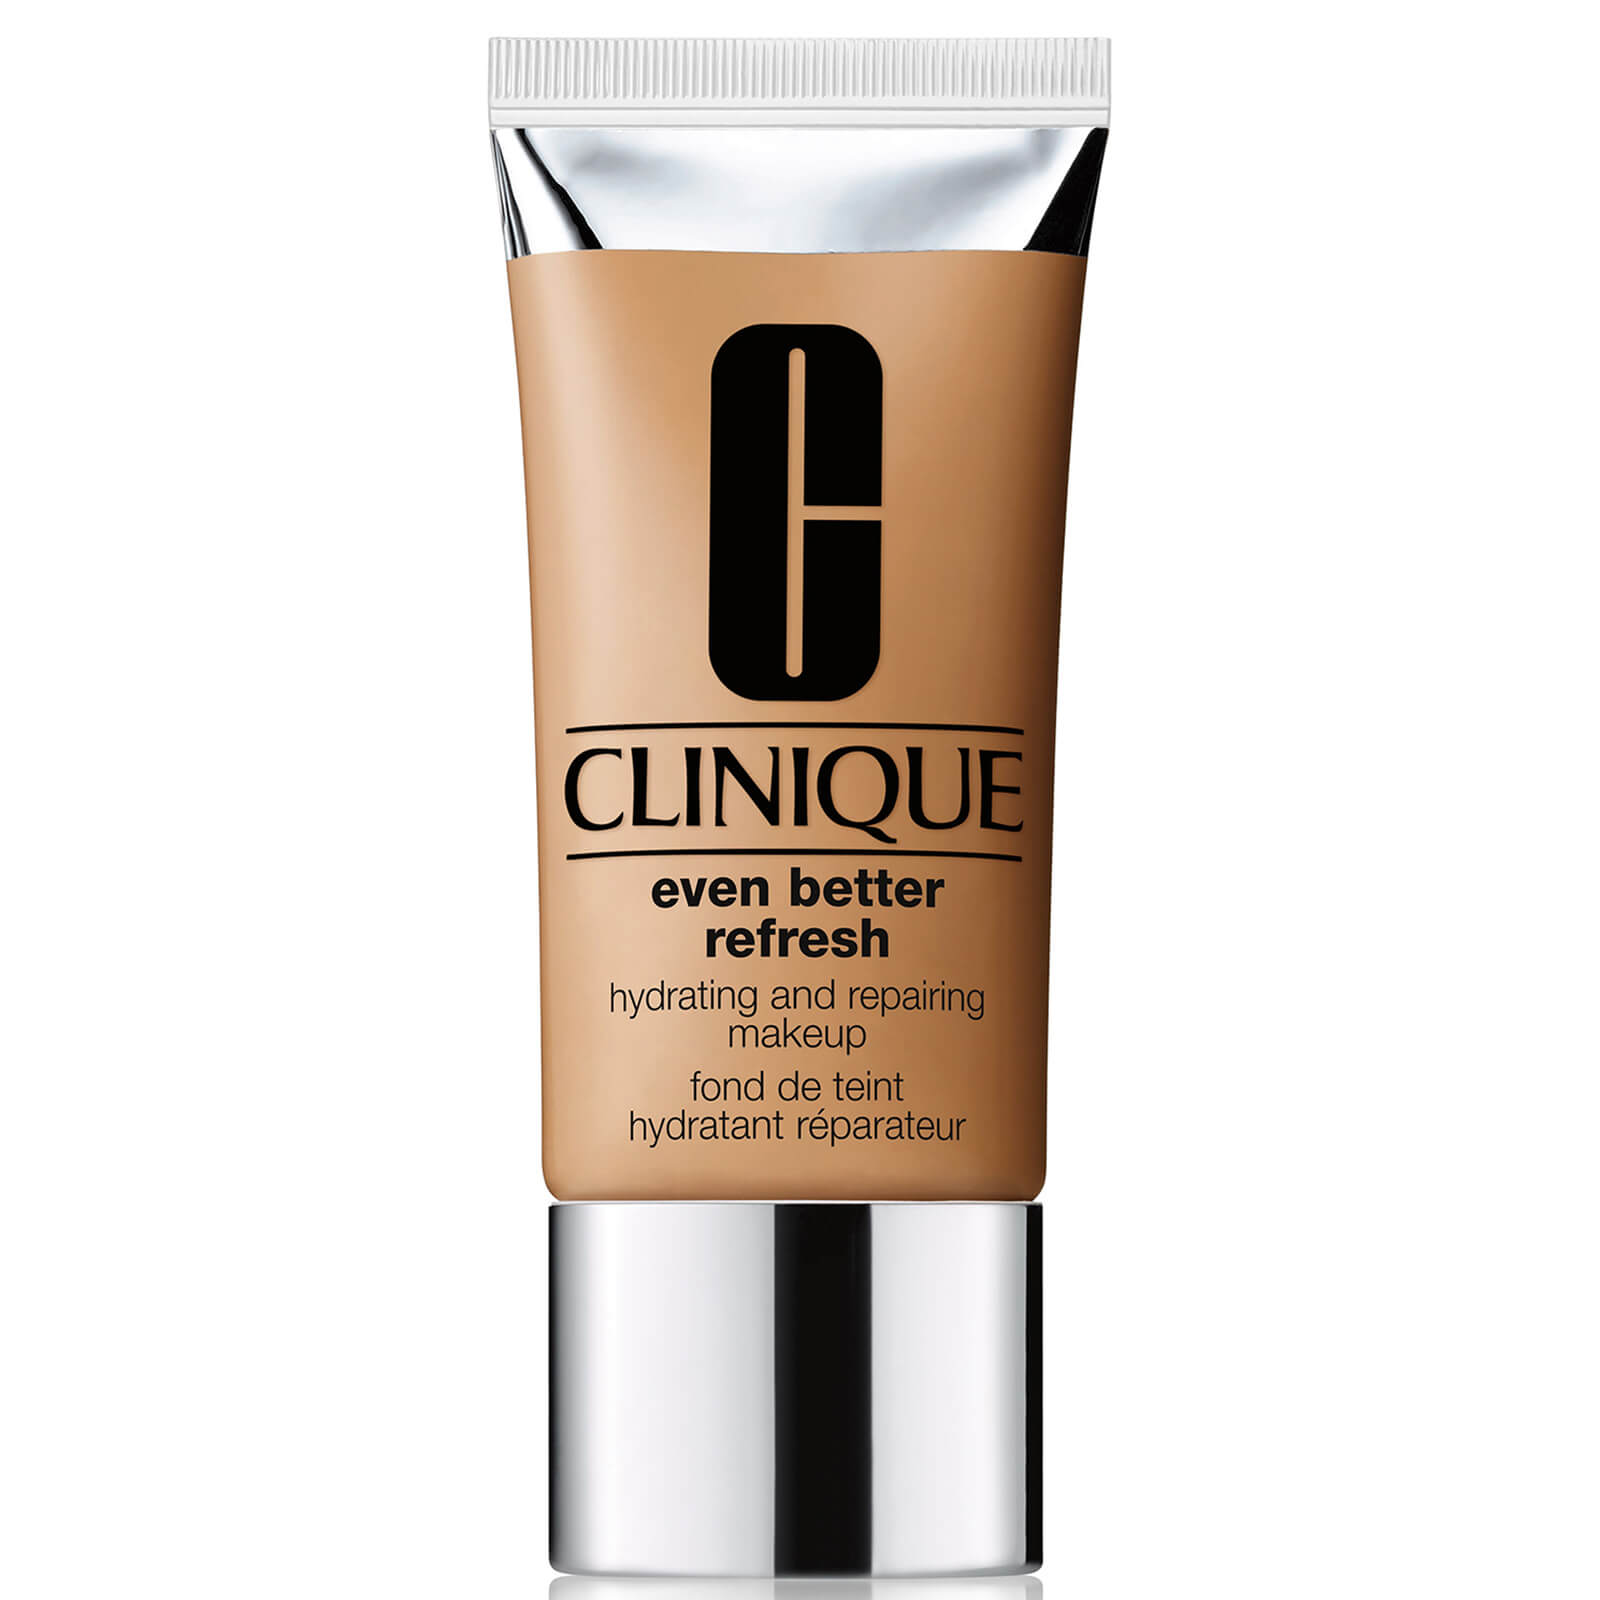 Clinique Even Better Refresh Hydrating and Repairing Makeup 30ml (Various Shades) - WN 114 Golden